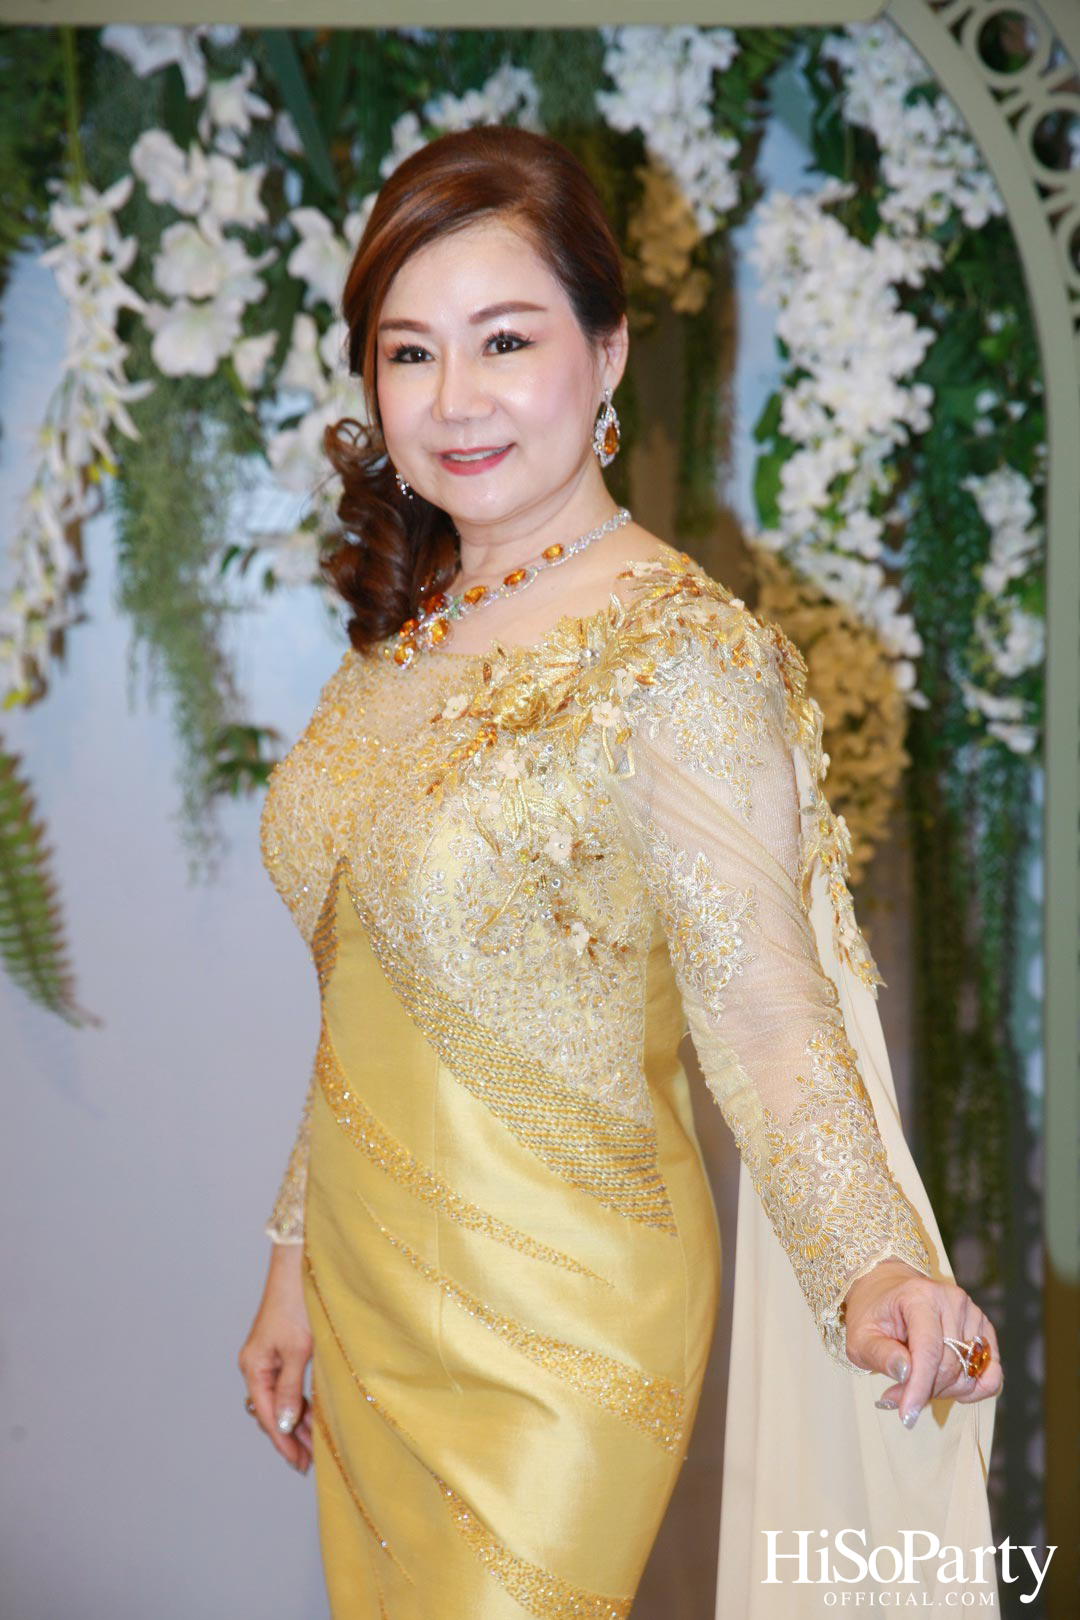 BEAUTY GEMS X ZONTA THAILAND - THE DISCOVERY OF BEAUTY GEMS UNIVERSE